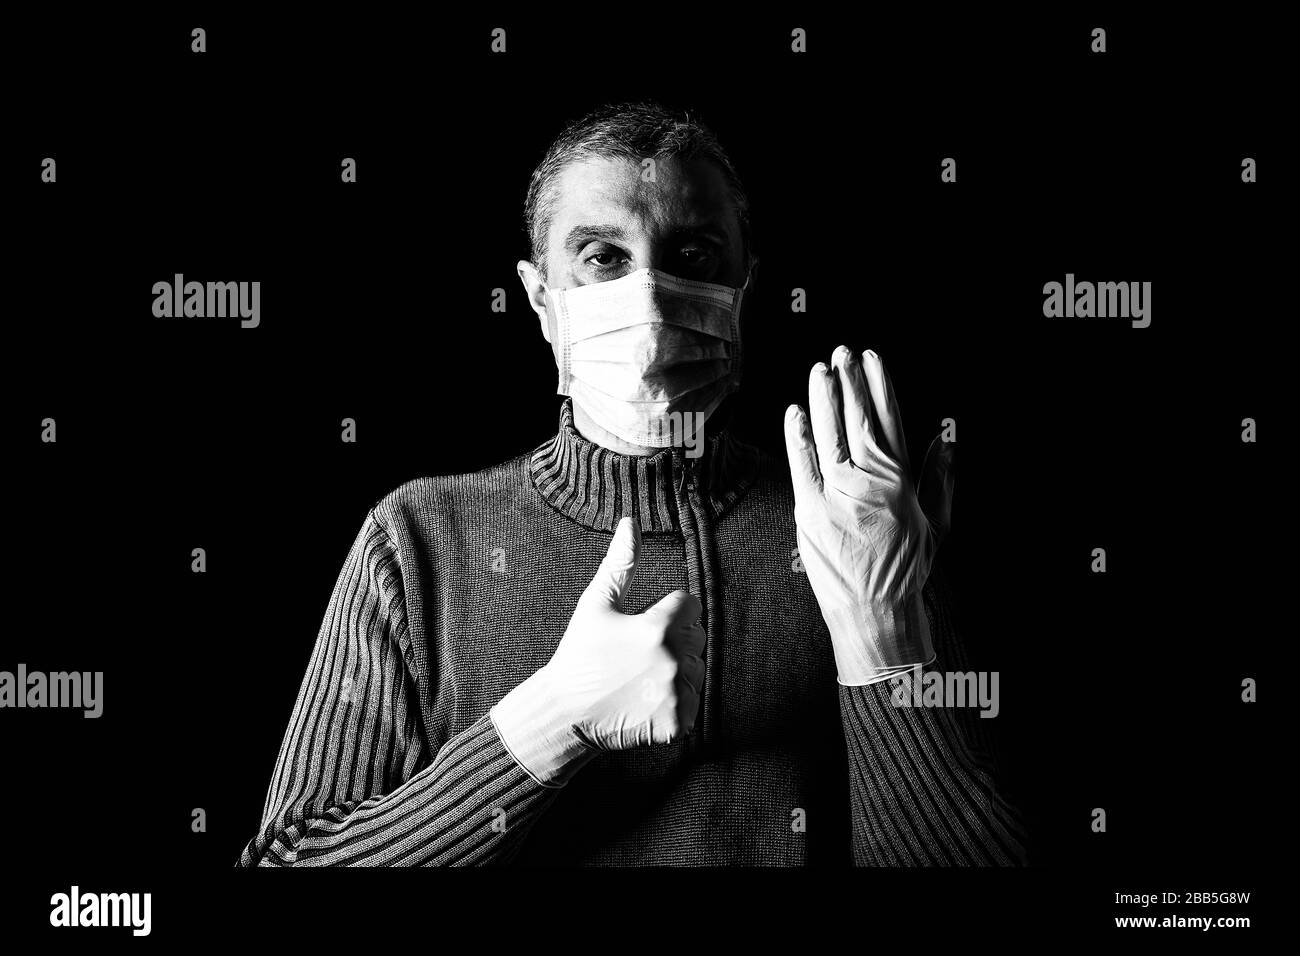 Man with surgical mask, protective gloves and thumbs up. Pandemic or epidemic, scary, fear or danger concept. Protection for biohazard like COVID-19, Stock Photo